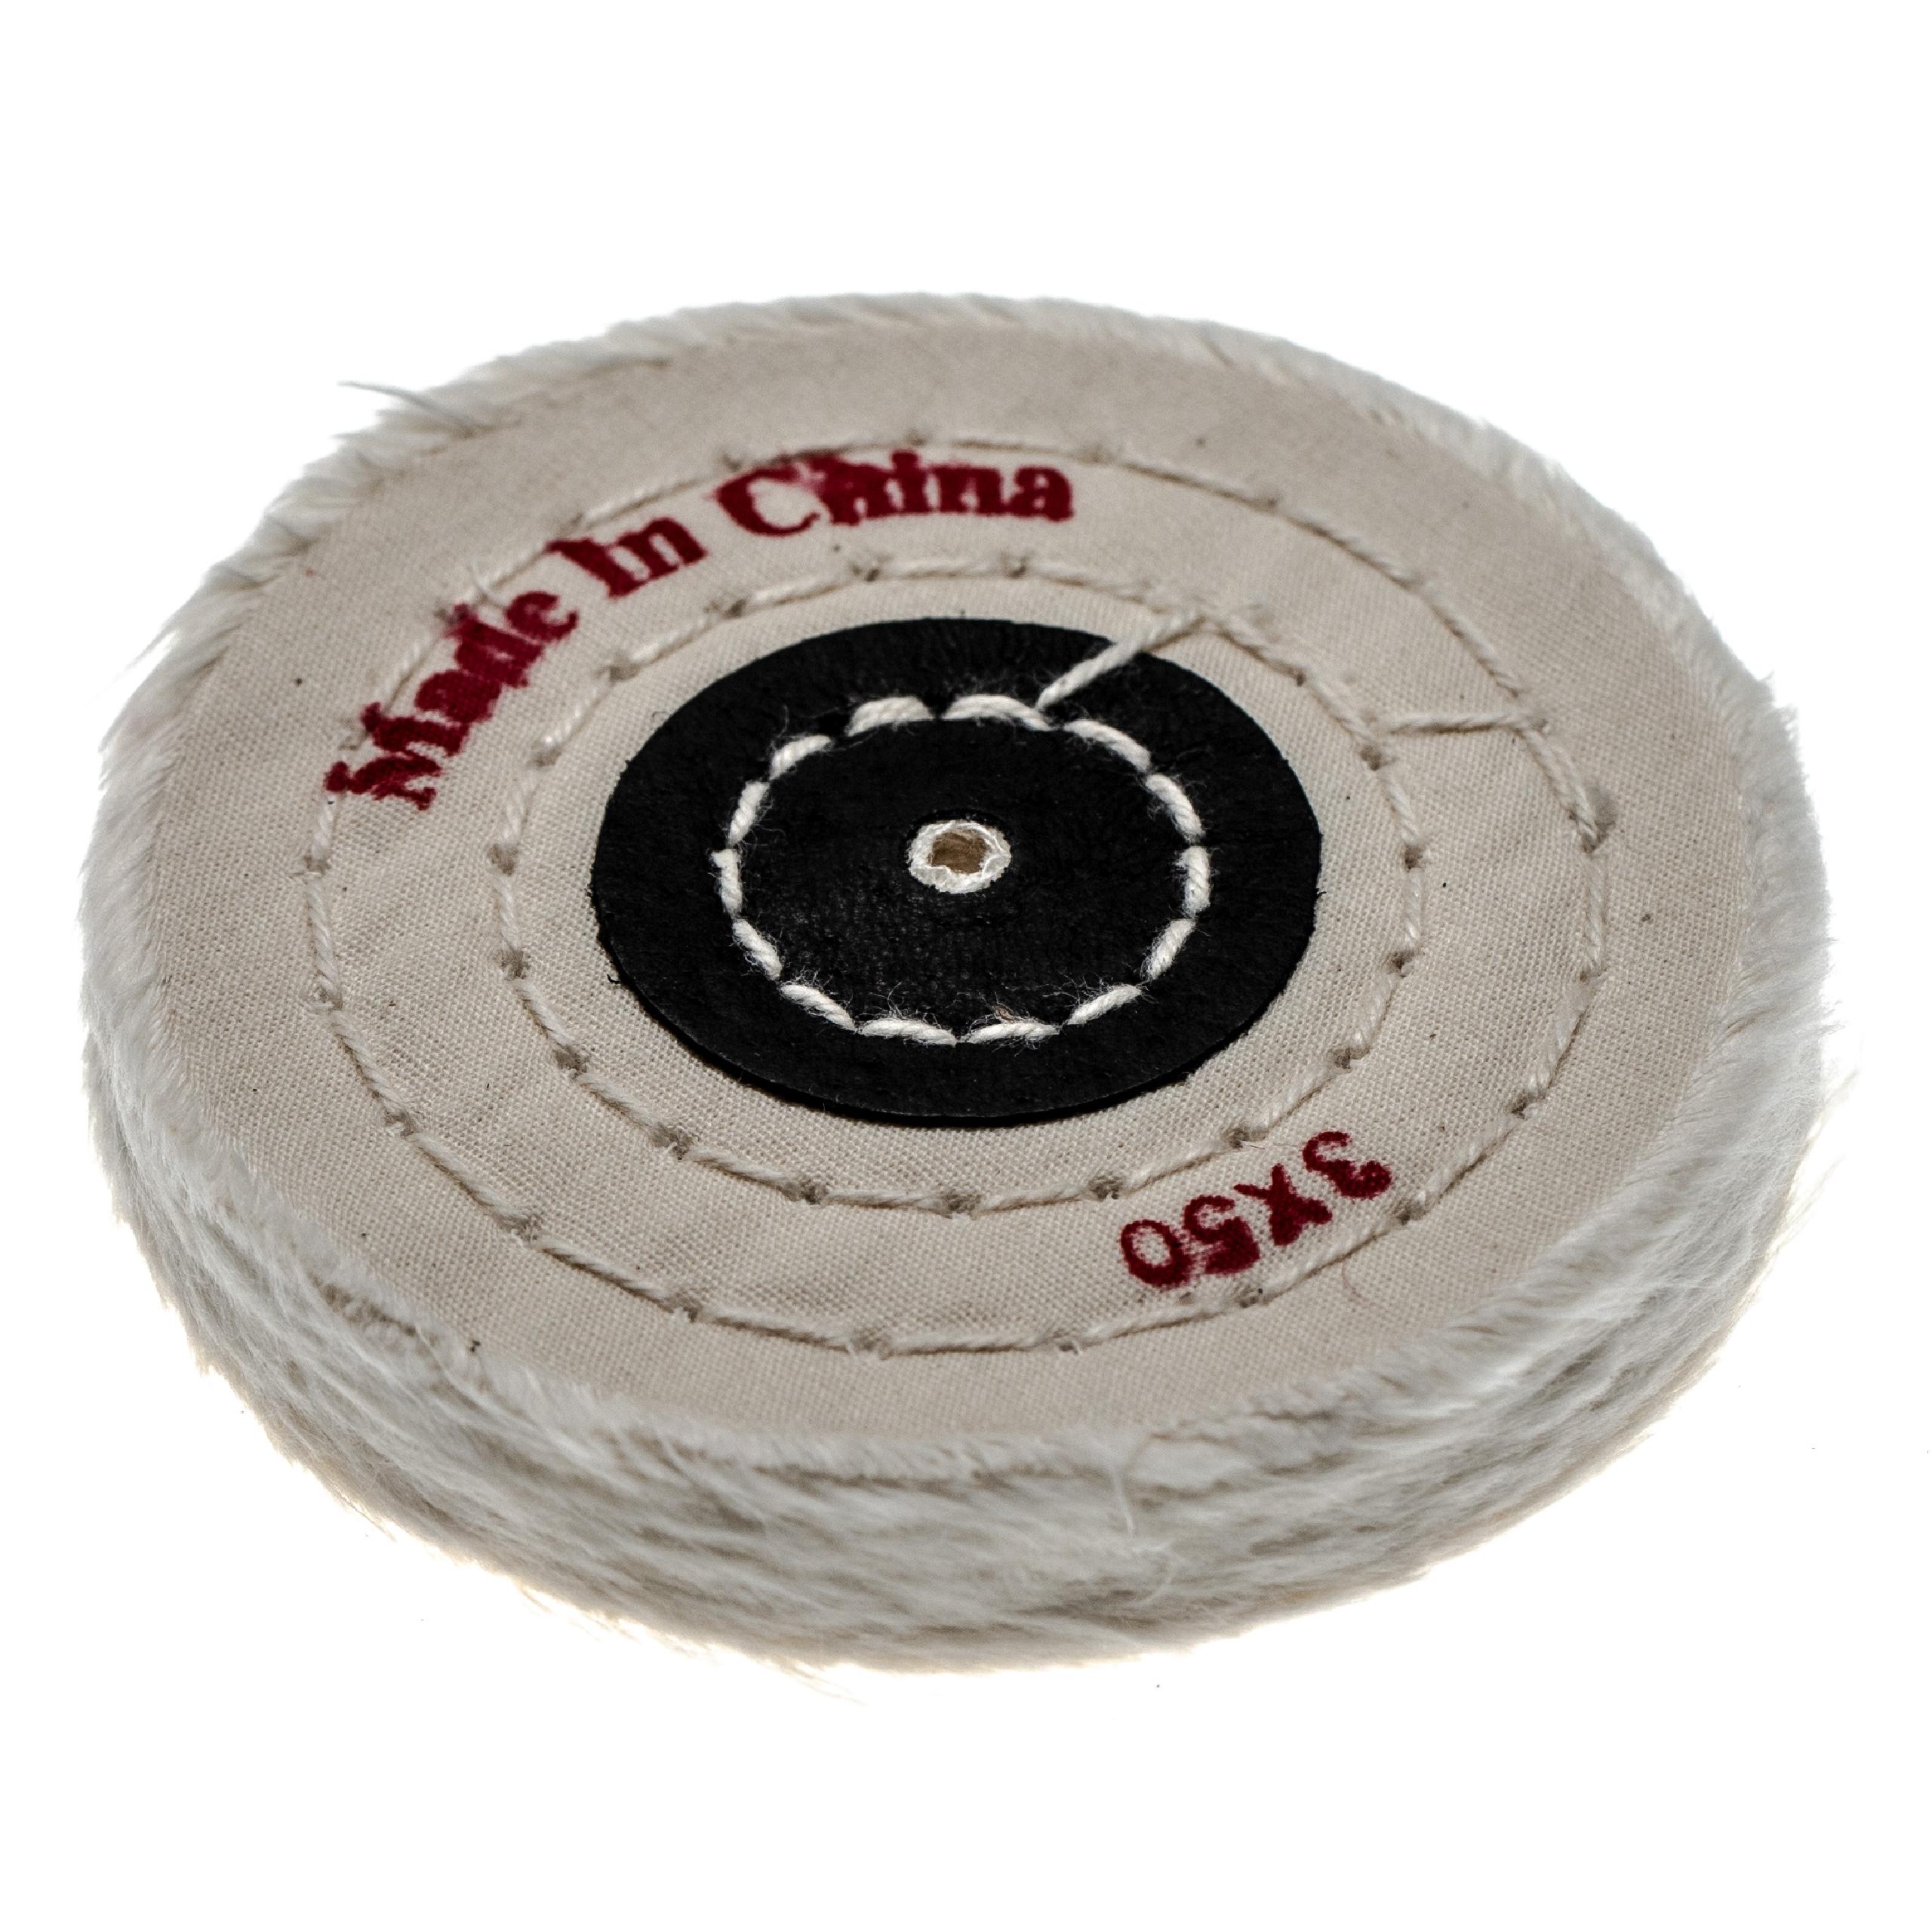 Polishing Pad suitable for all Standard Angle Grinders, Screwdrivers with 7.5cm Diameter - cream